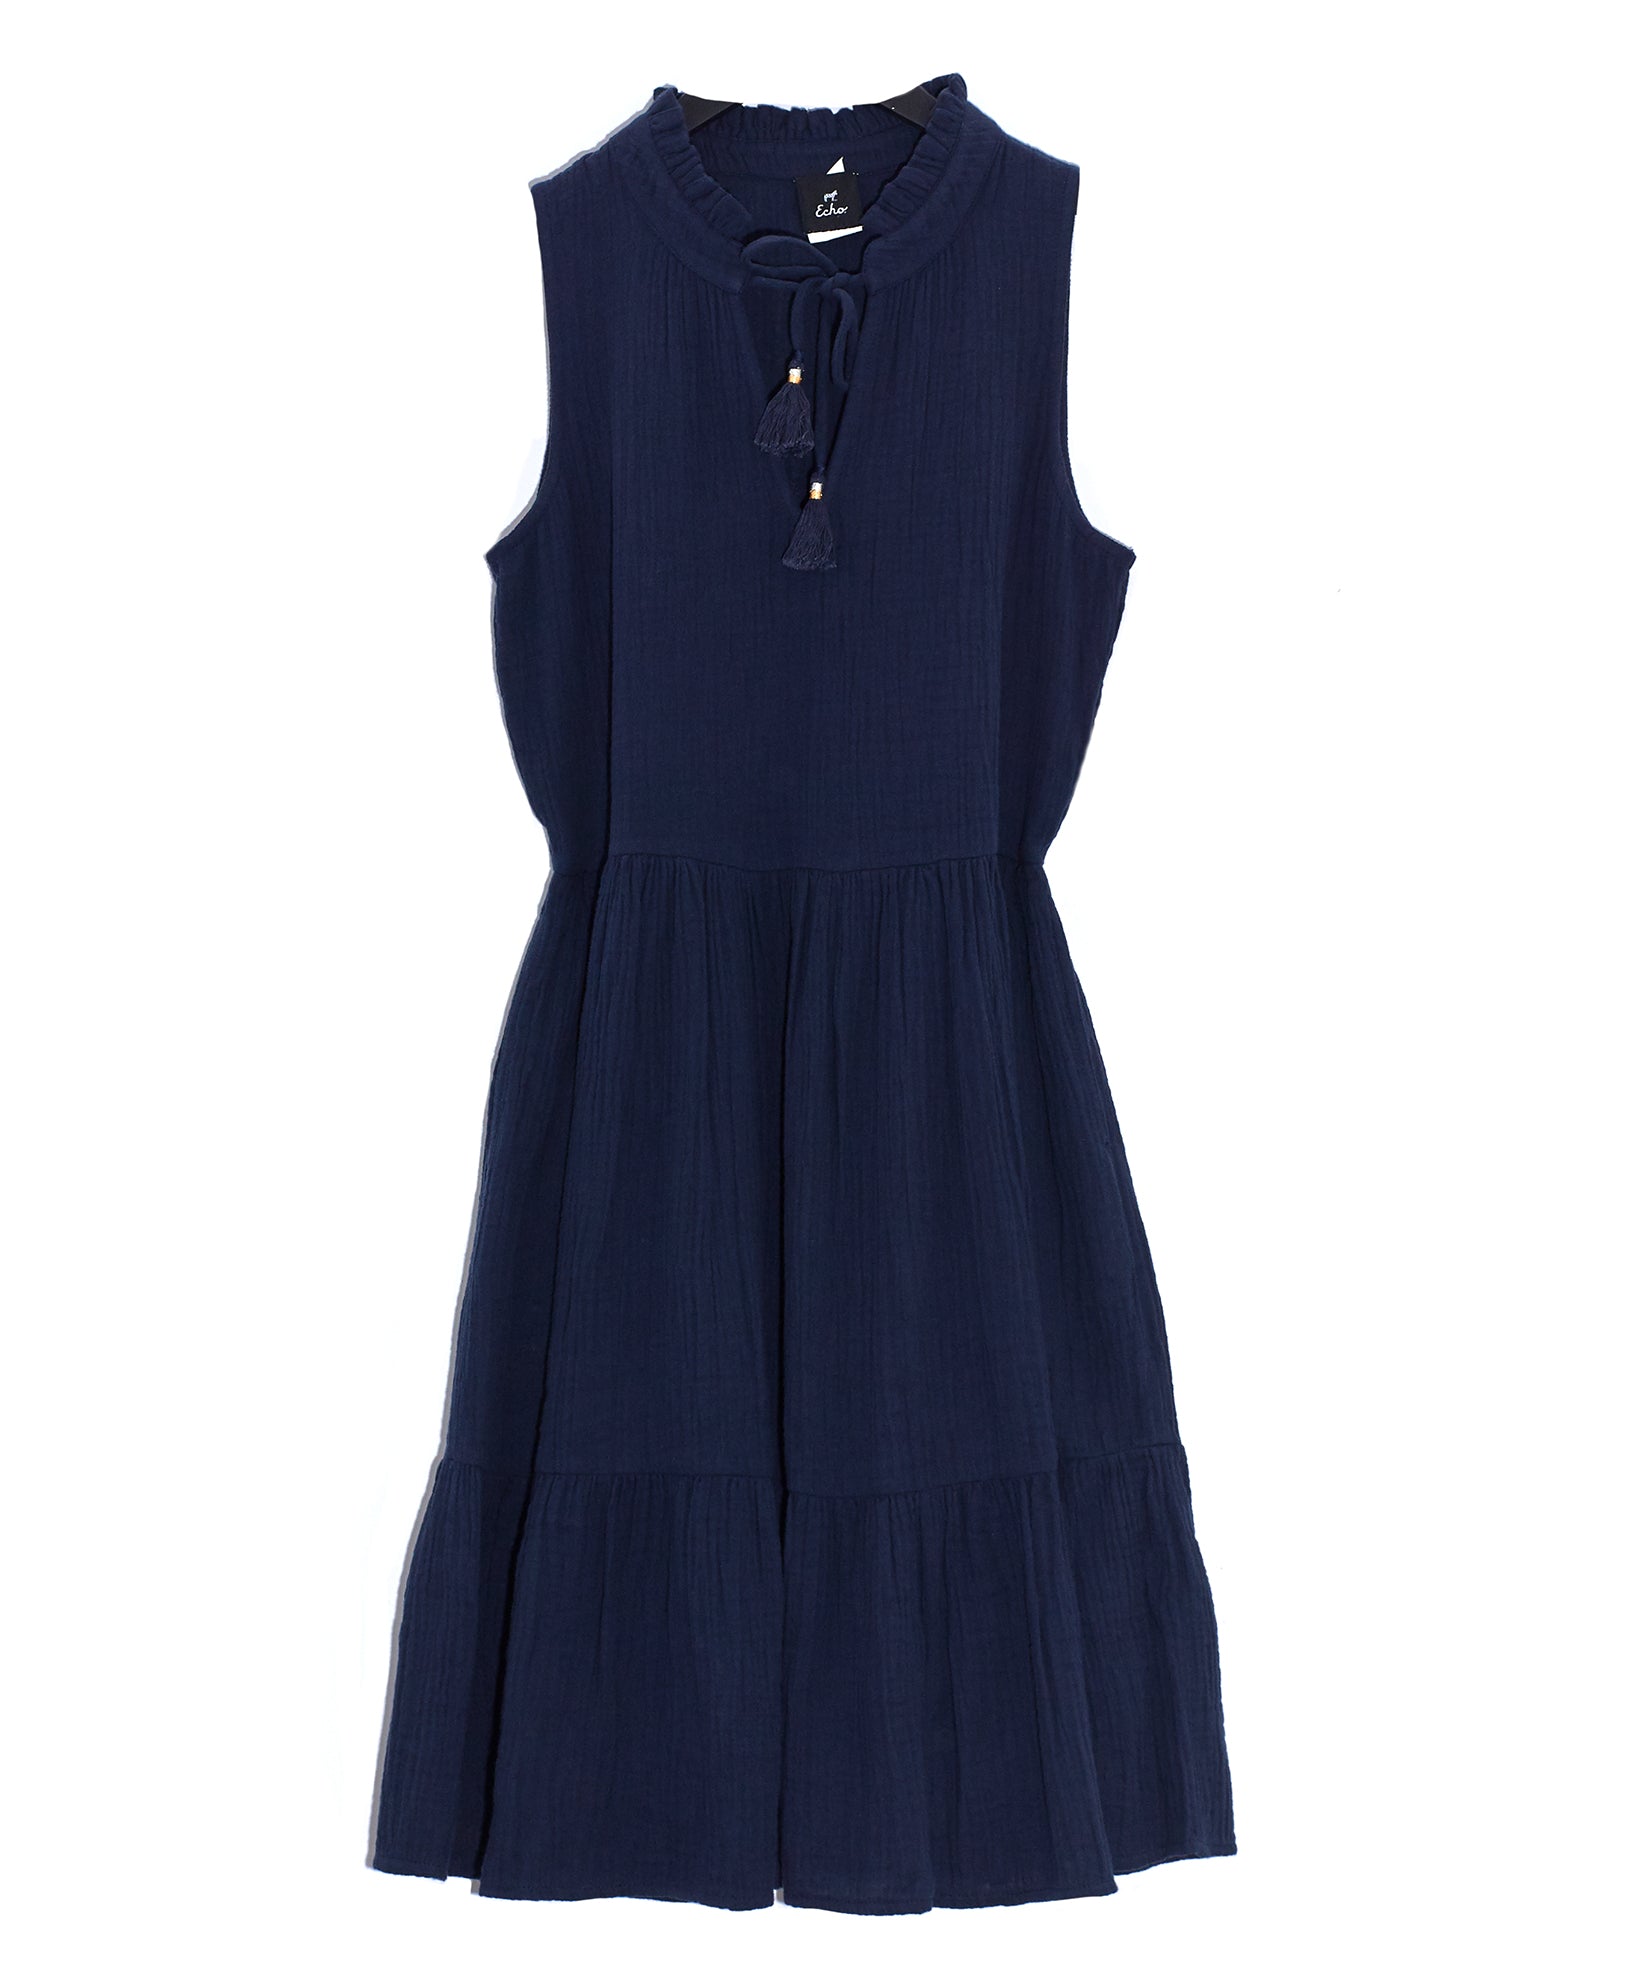 Dbl. Gauze Short Tiered Dress in color Navy